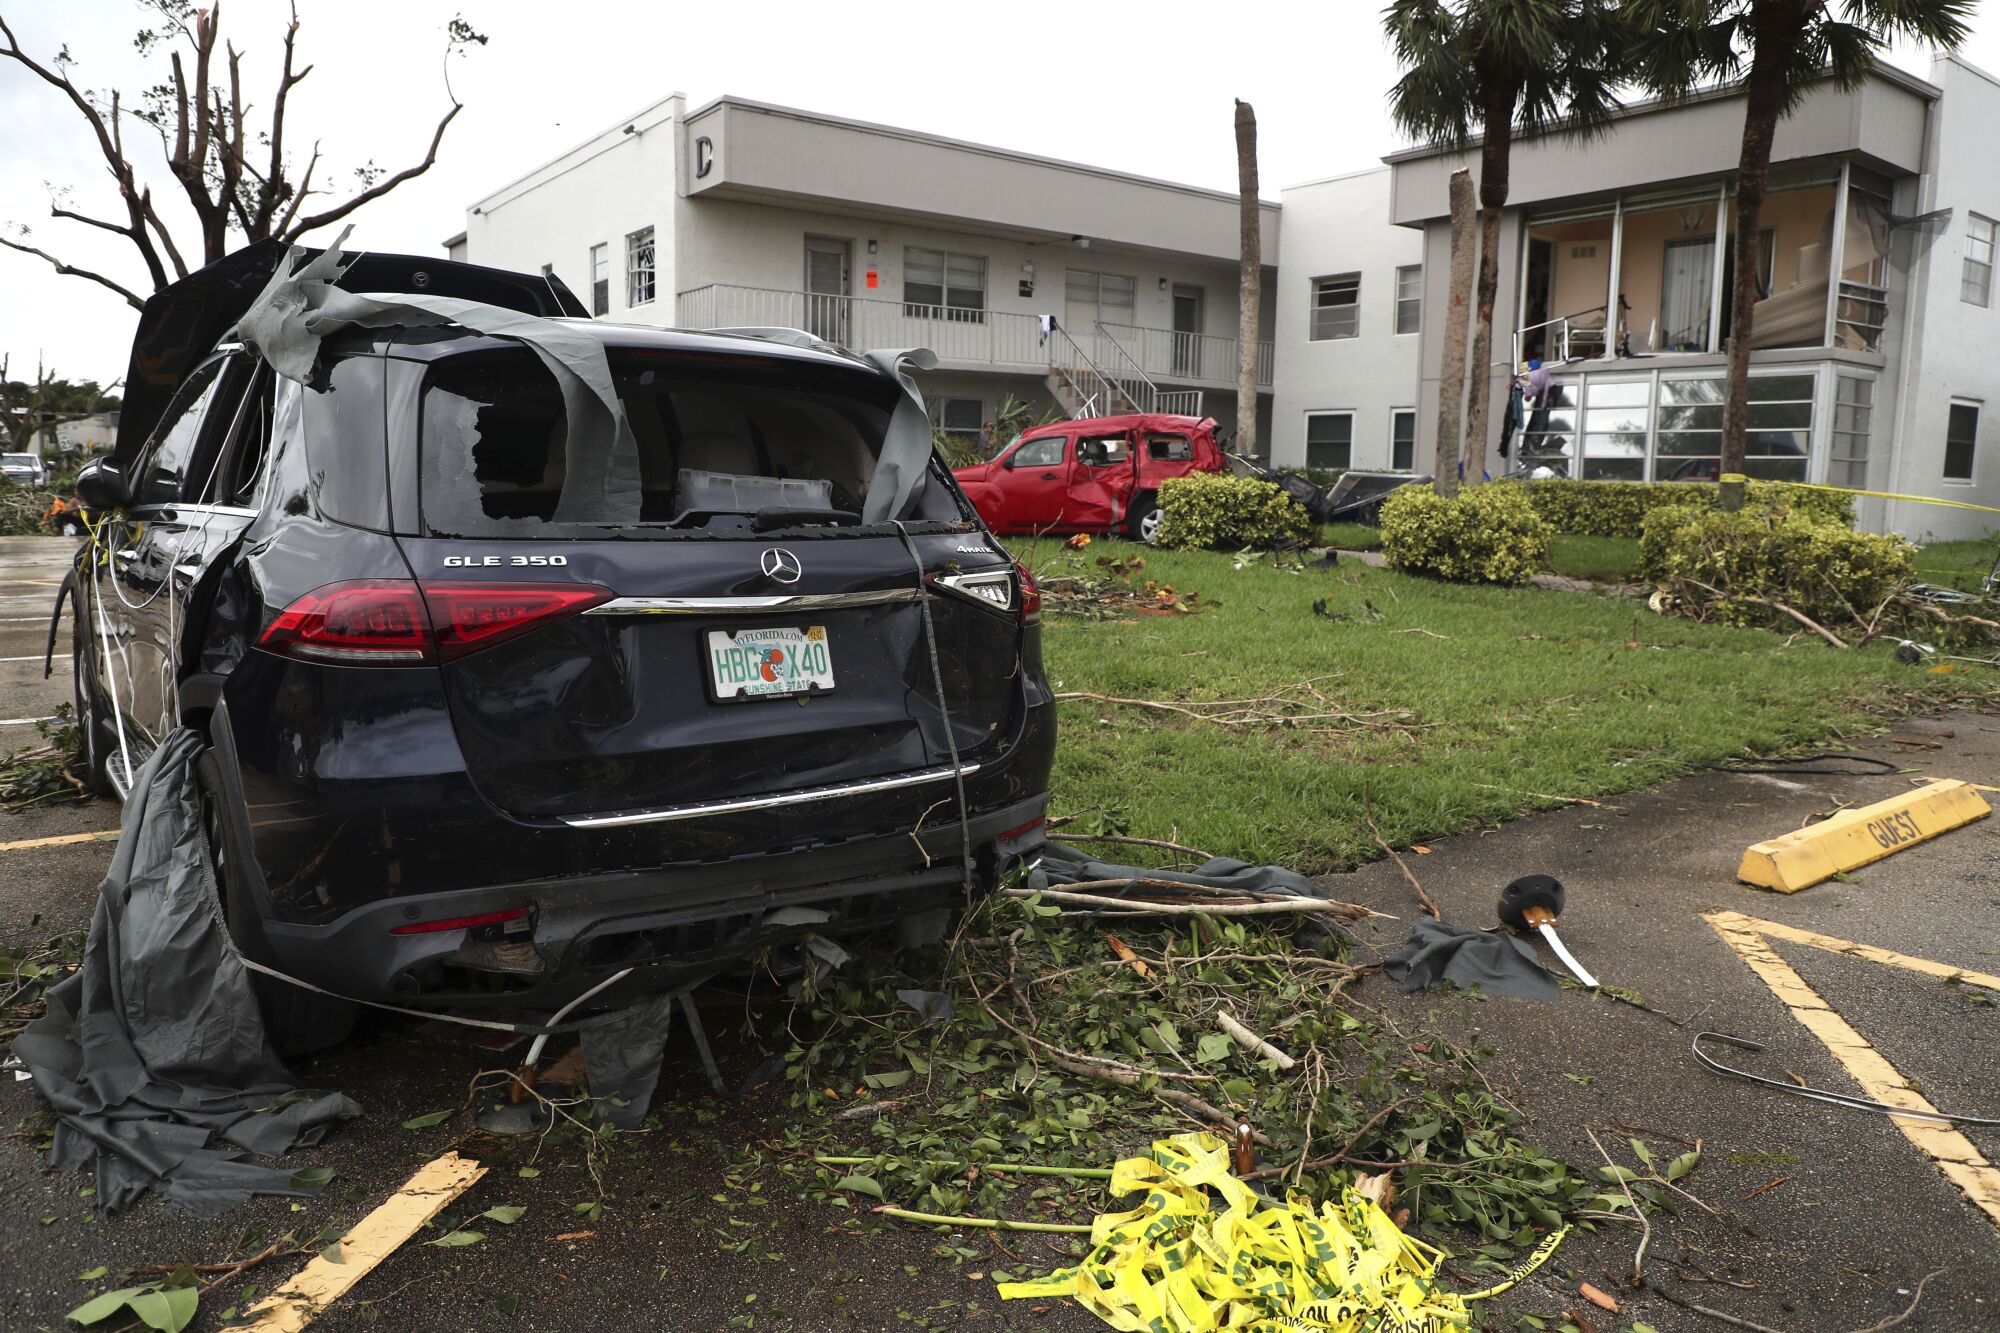 Cars damaged from an apparent overnight tornado spawned from Hurricane Ian at Kings Point 55+ community in Delray Beach, Fla.